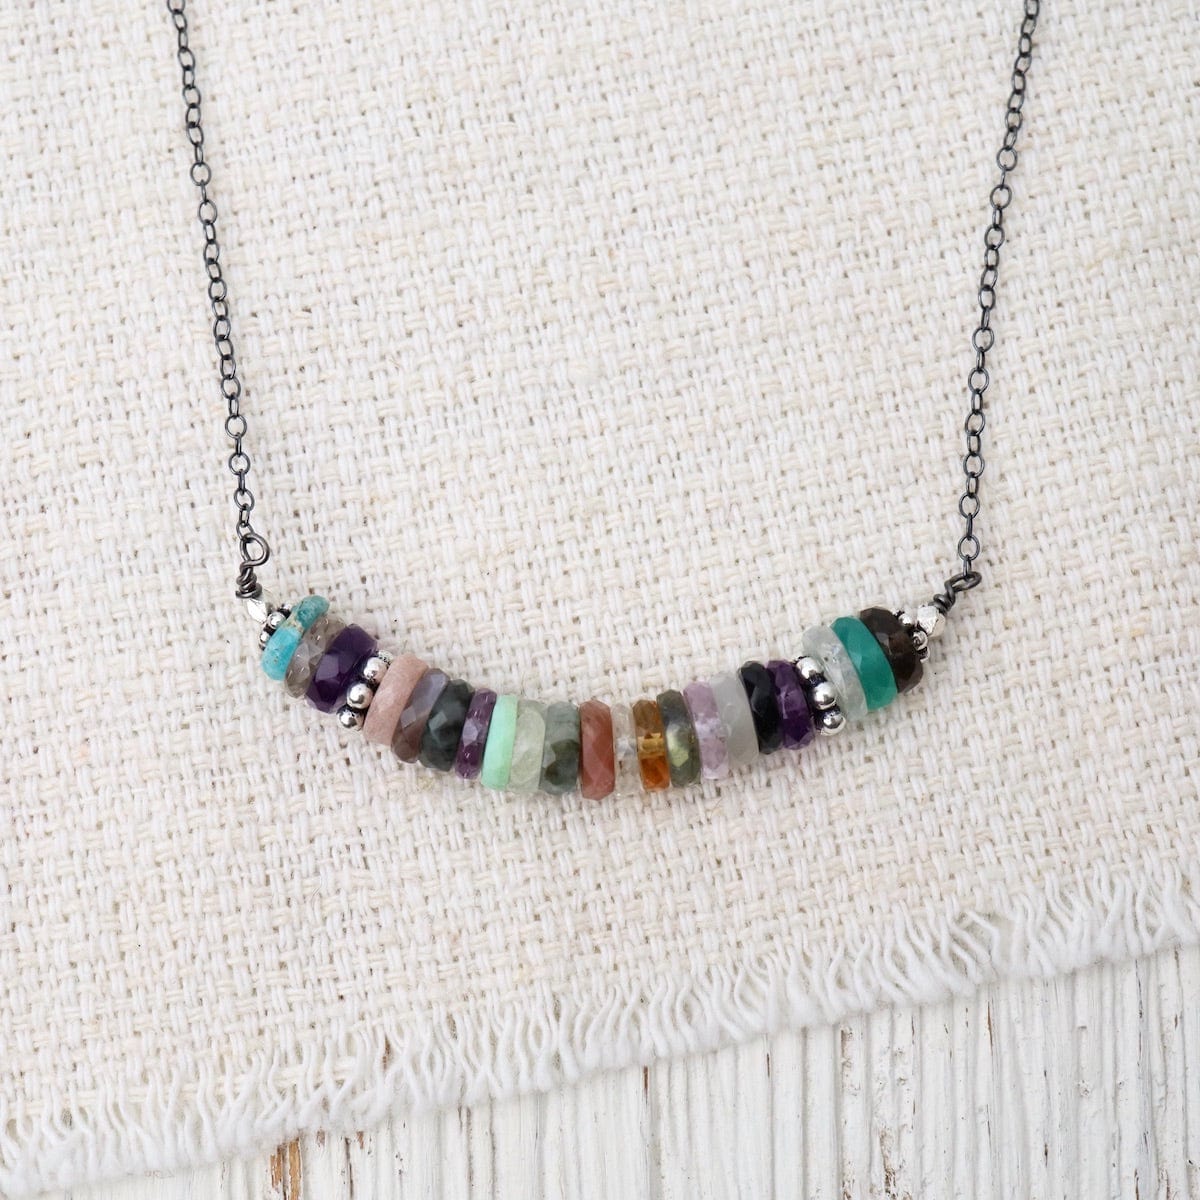 NKL Assorted Gemstones with Sterling Silver Spacers Necklace